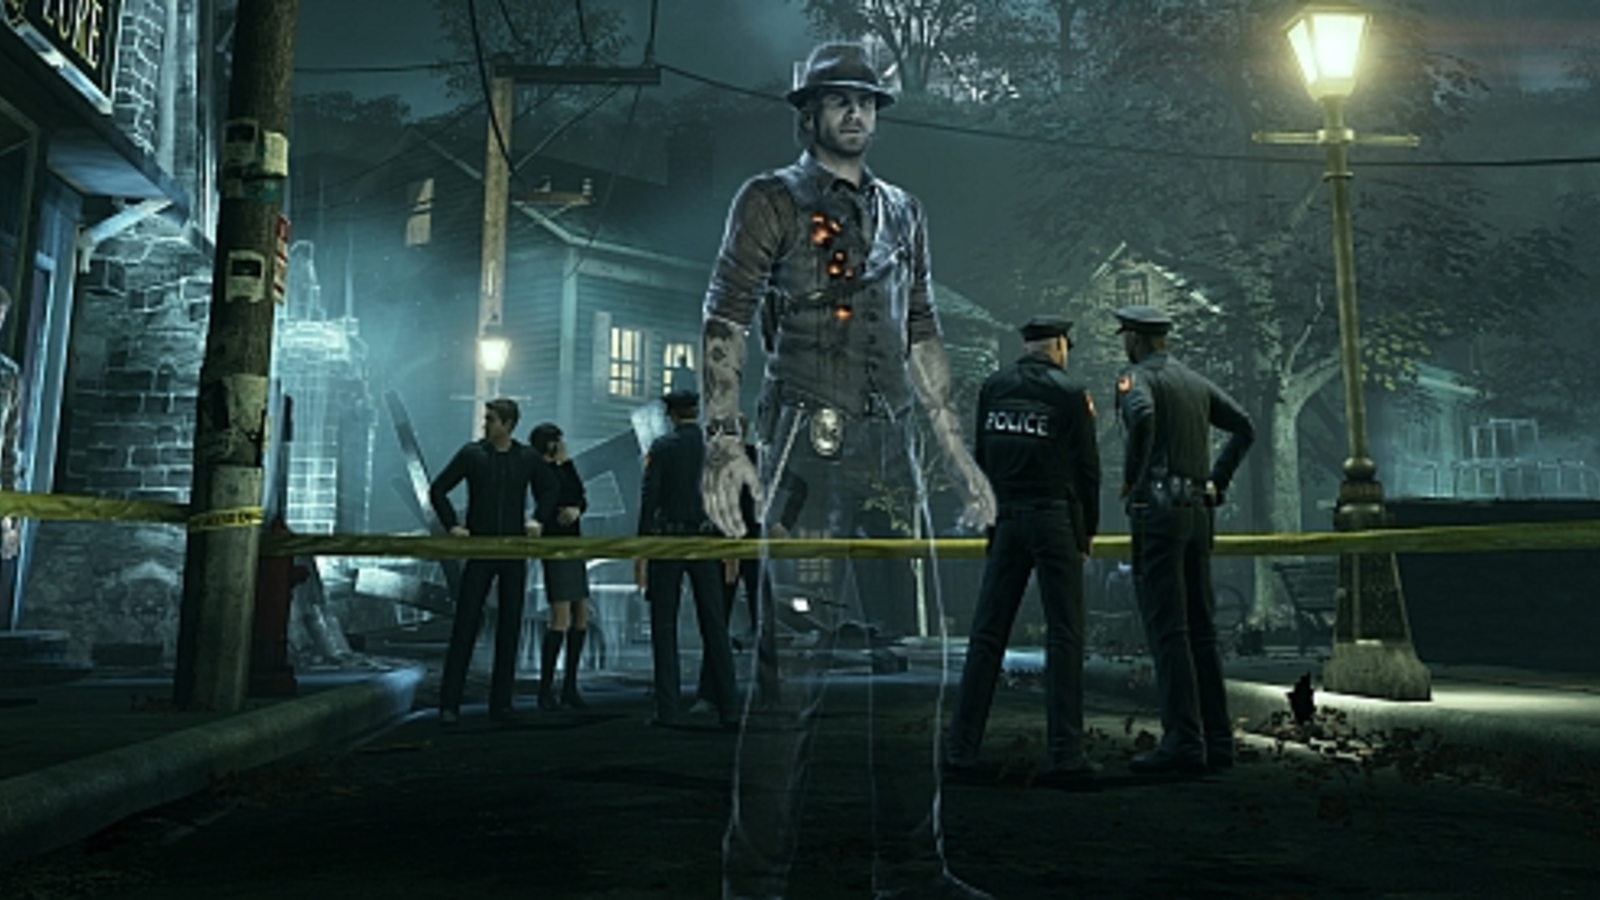 MURDERED: SOUL SUSPECT XBOX ONE & SERIES X|S🔑KEY